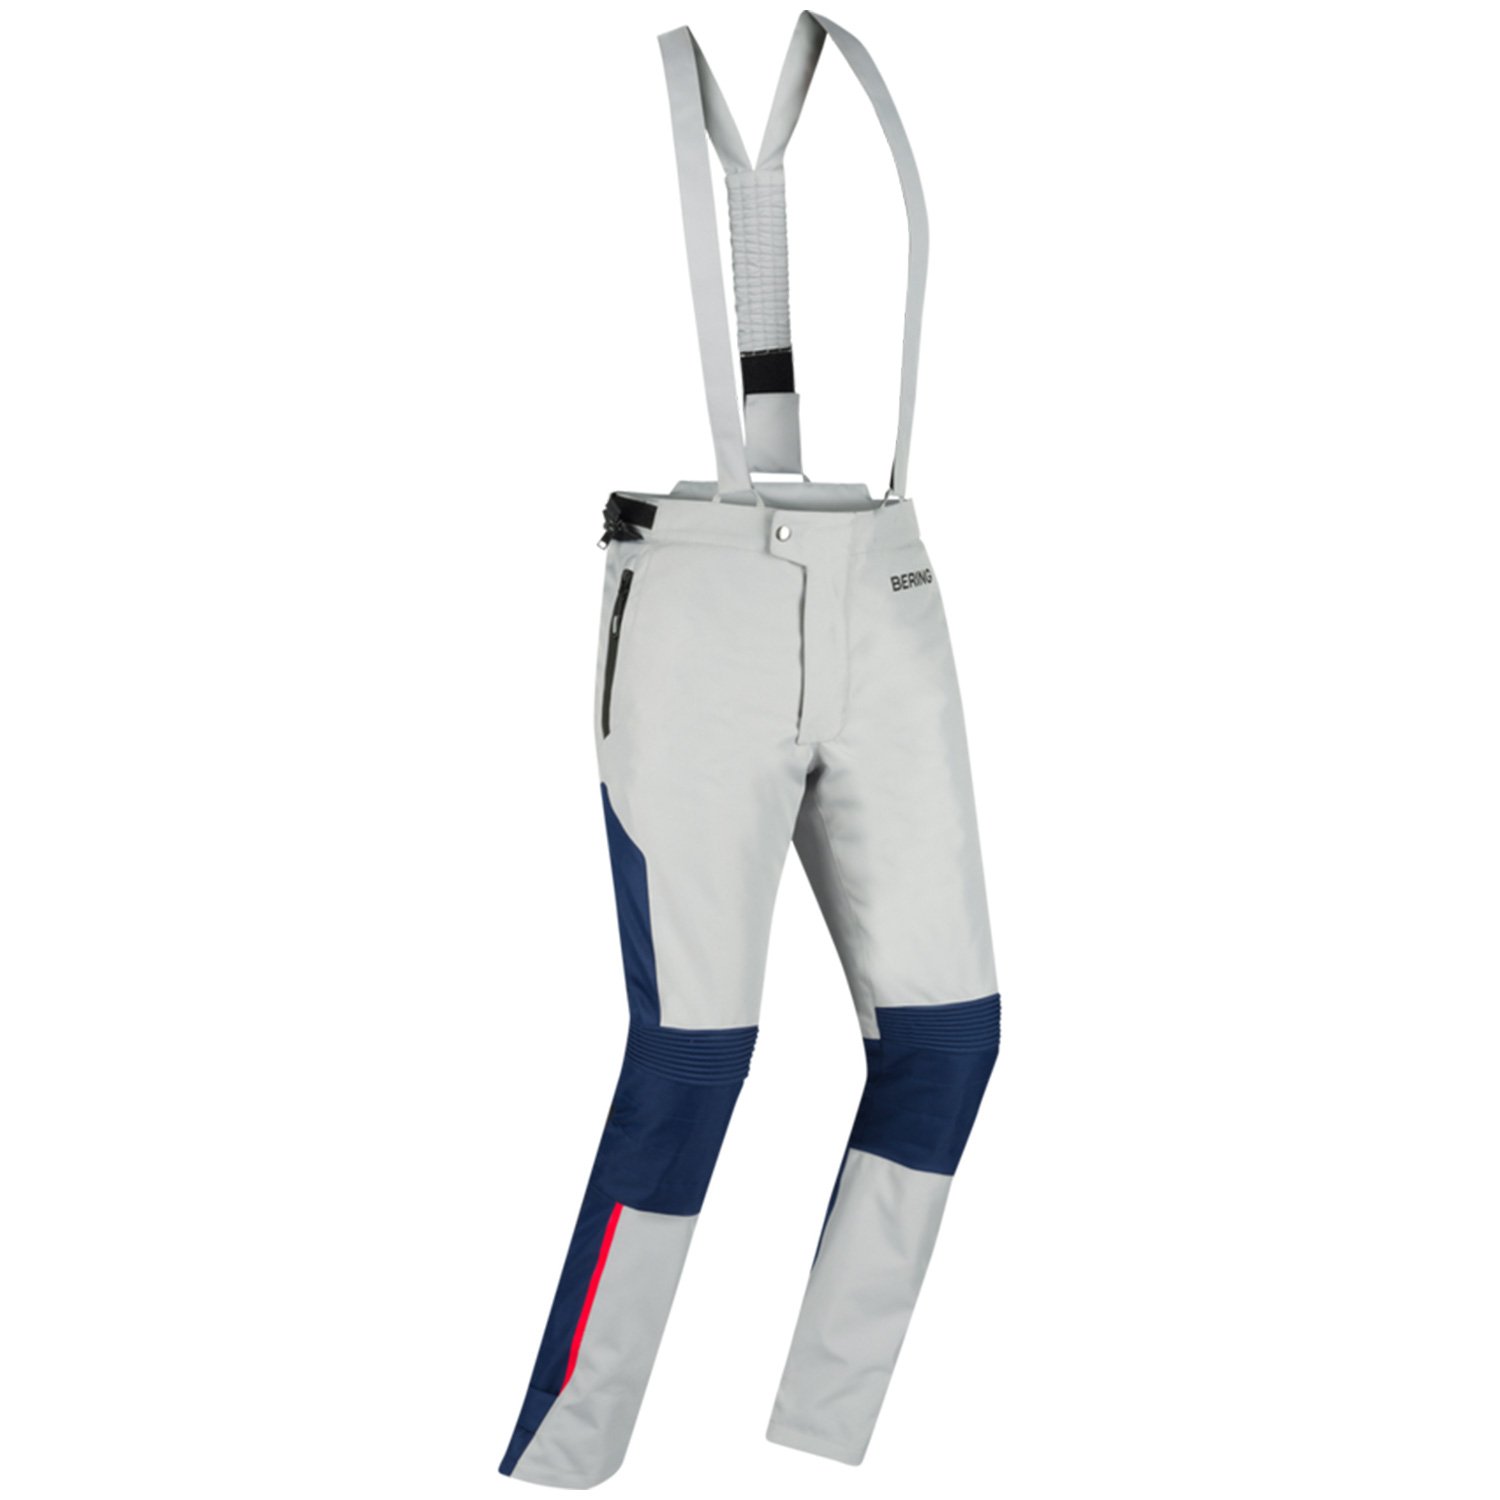 Image of Bering Siberia Trousers Grey Blue Red Size S ID 3660815181591